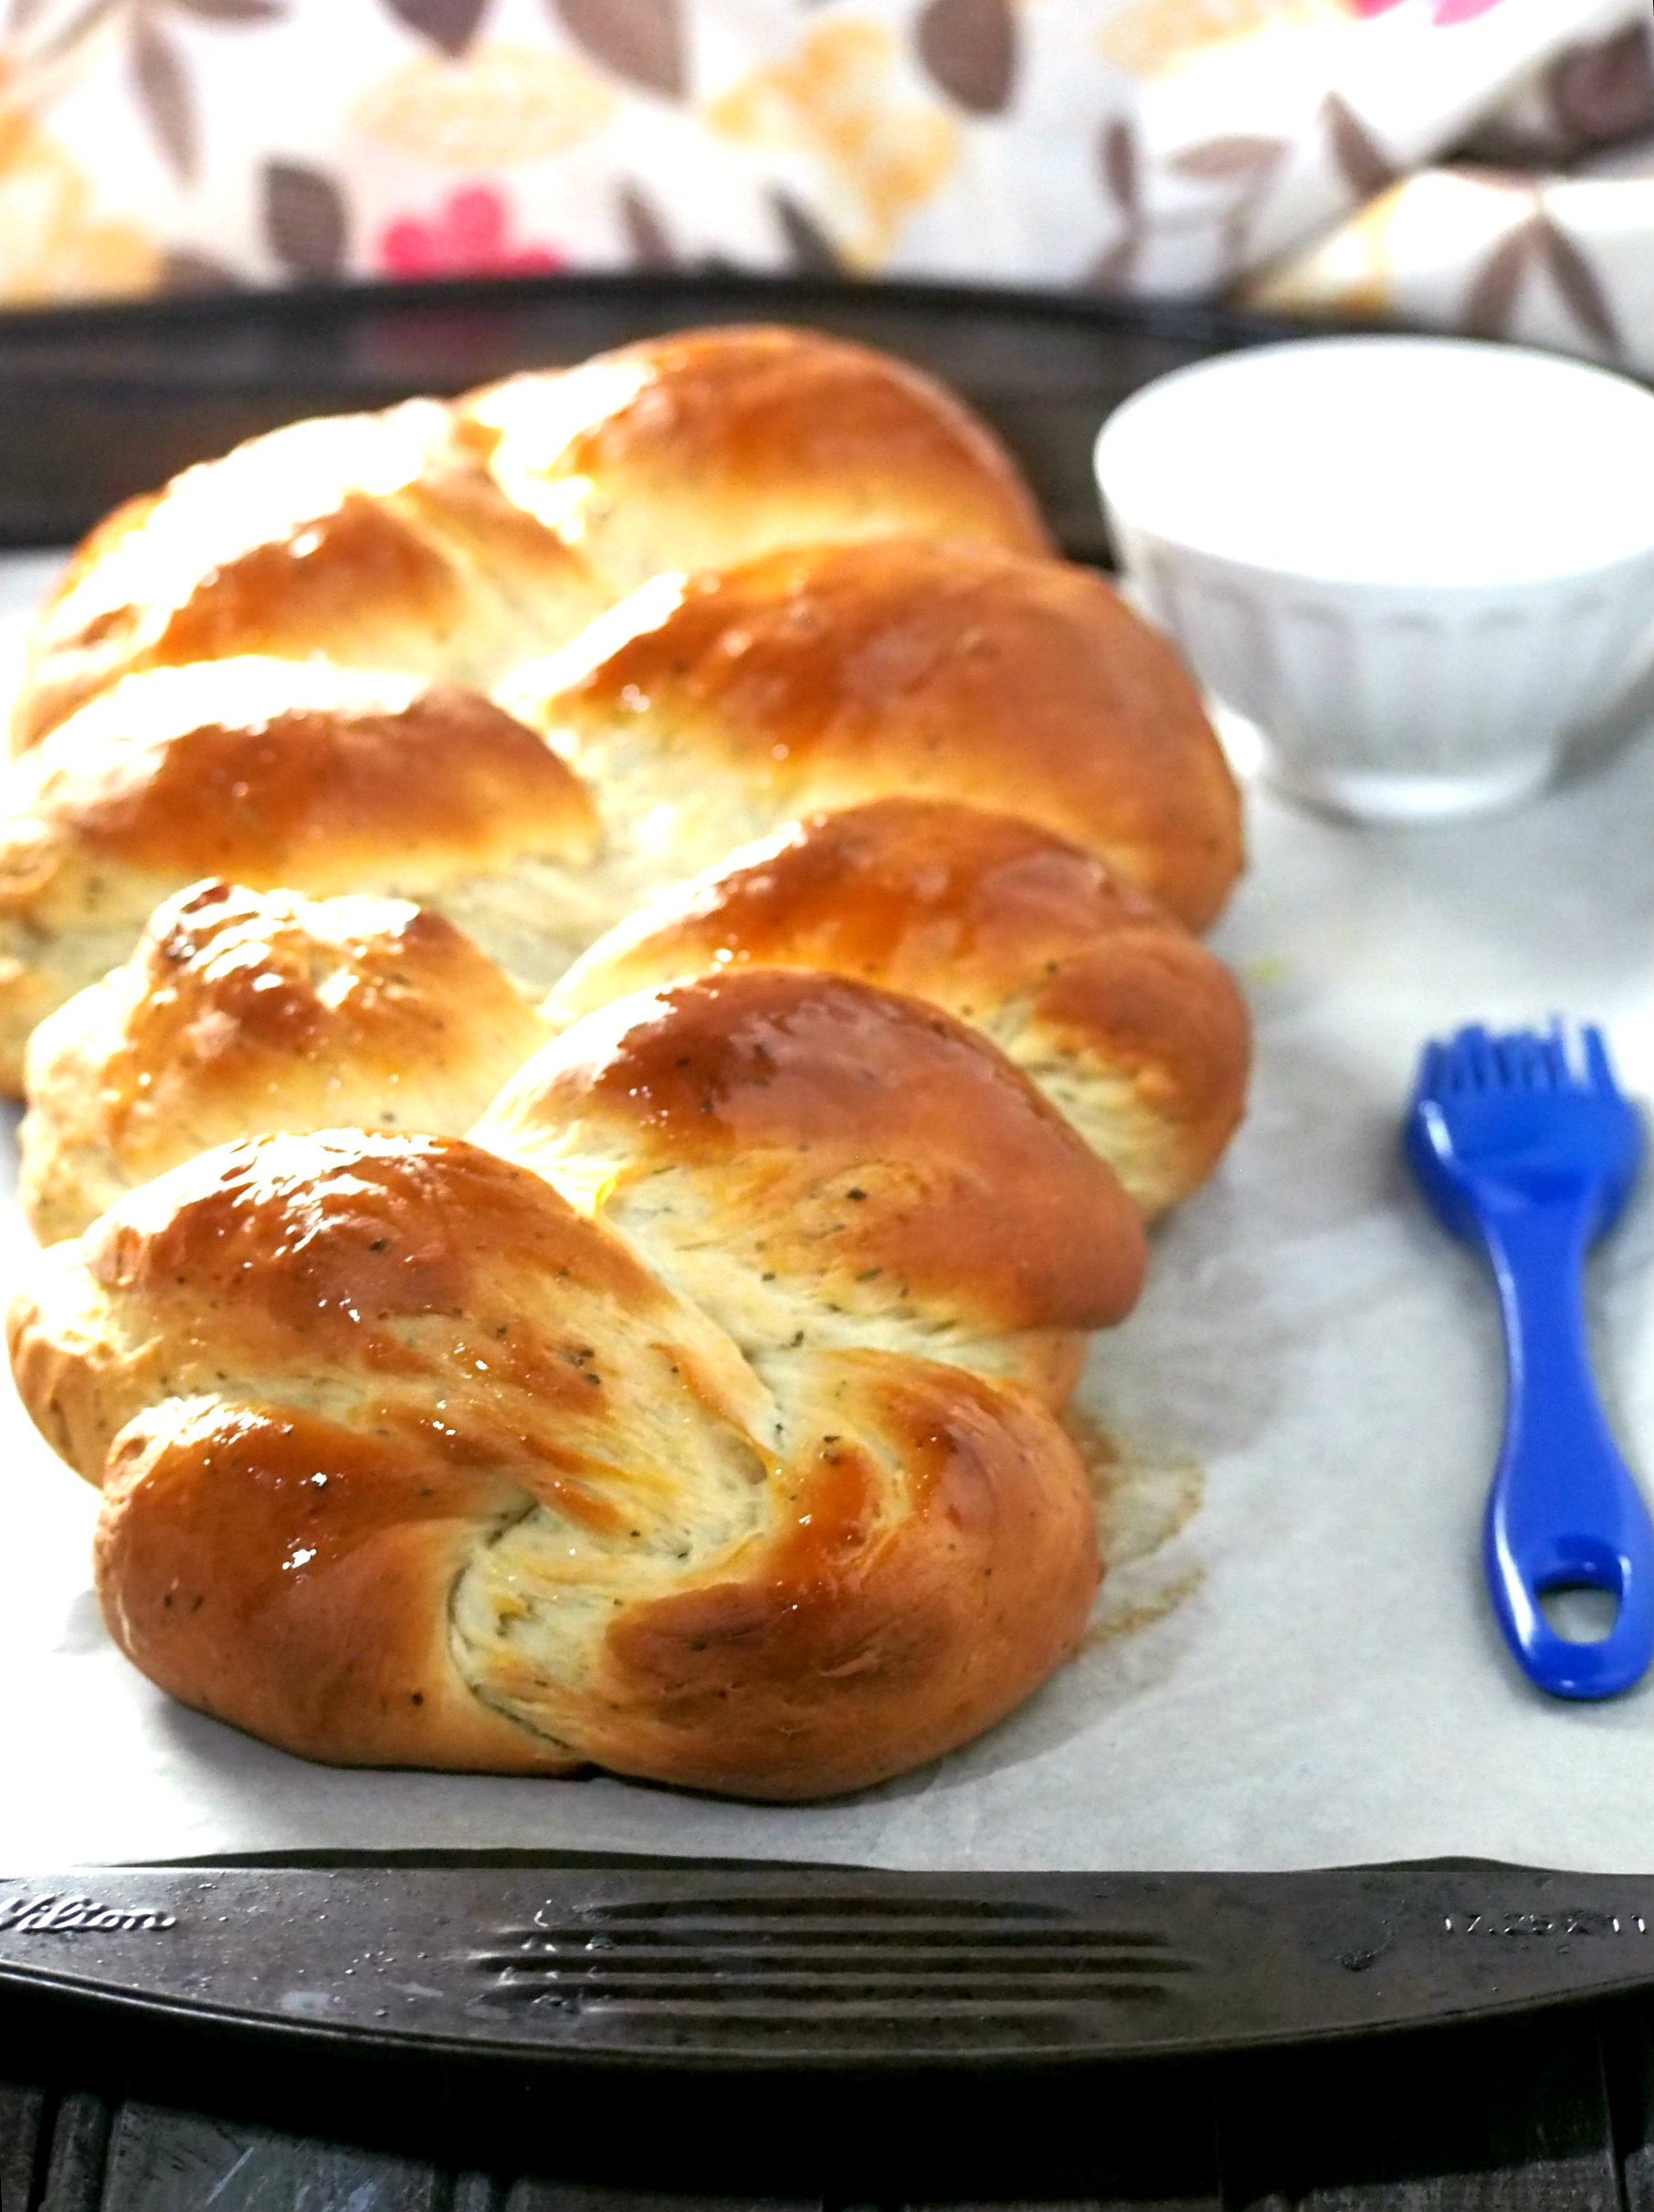 Garlic Herb Bread is a tasty braided loaf that is infused with herbs and full of savory garlic flavor. Serve this as a side along with your meal or alone as a filling snack.